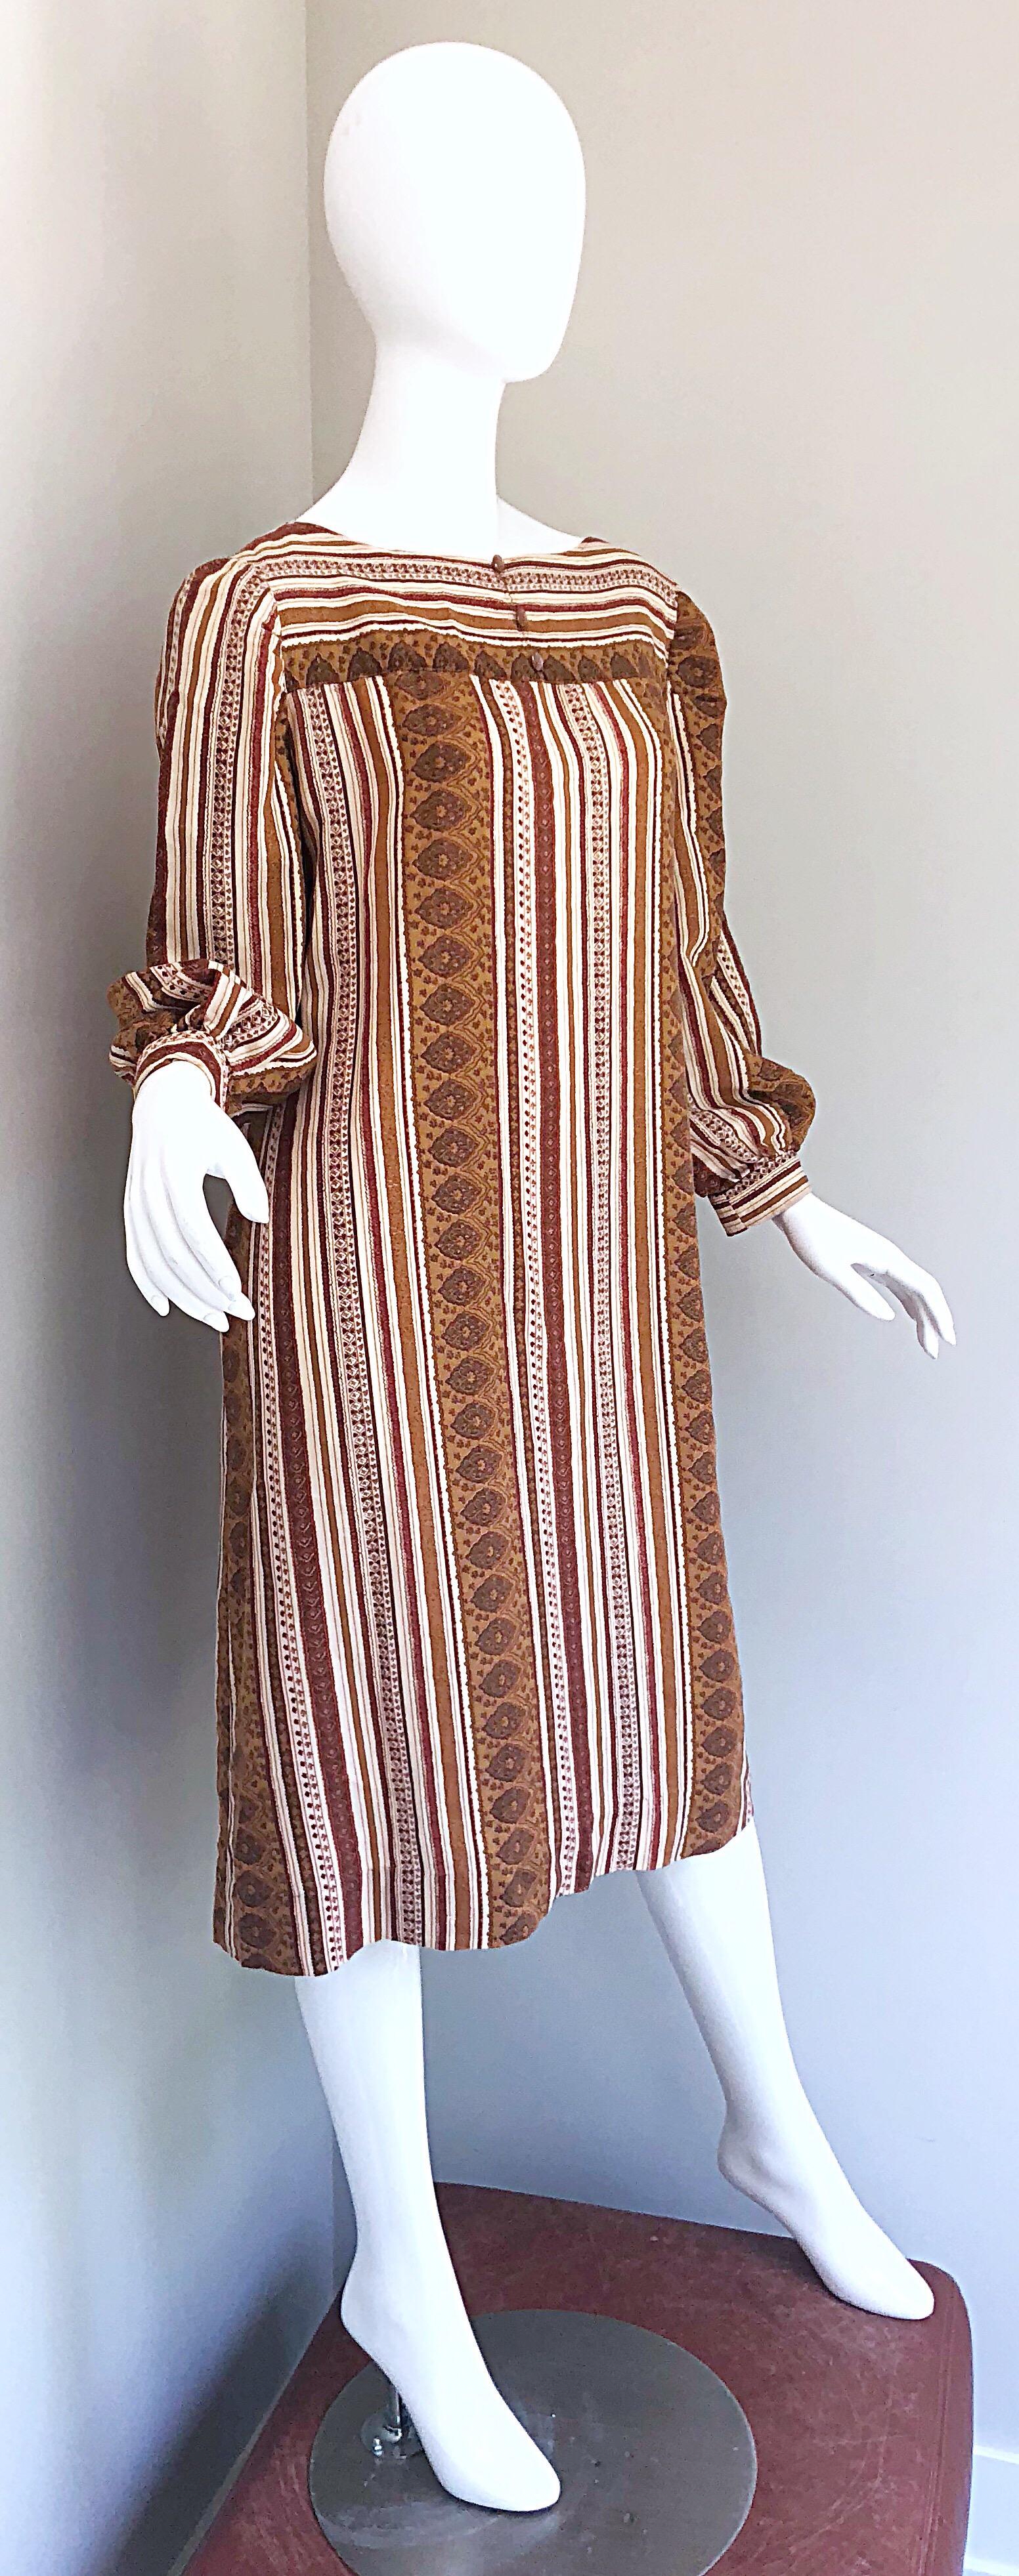 1970s Boho Chic Brown and Ivory Soft Cotton Paisley Print Vintage 70s Dress 7